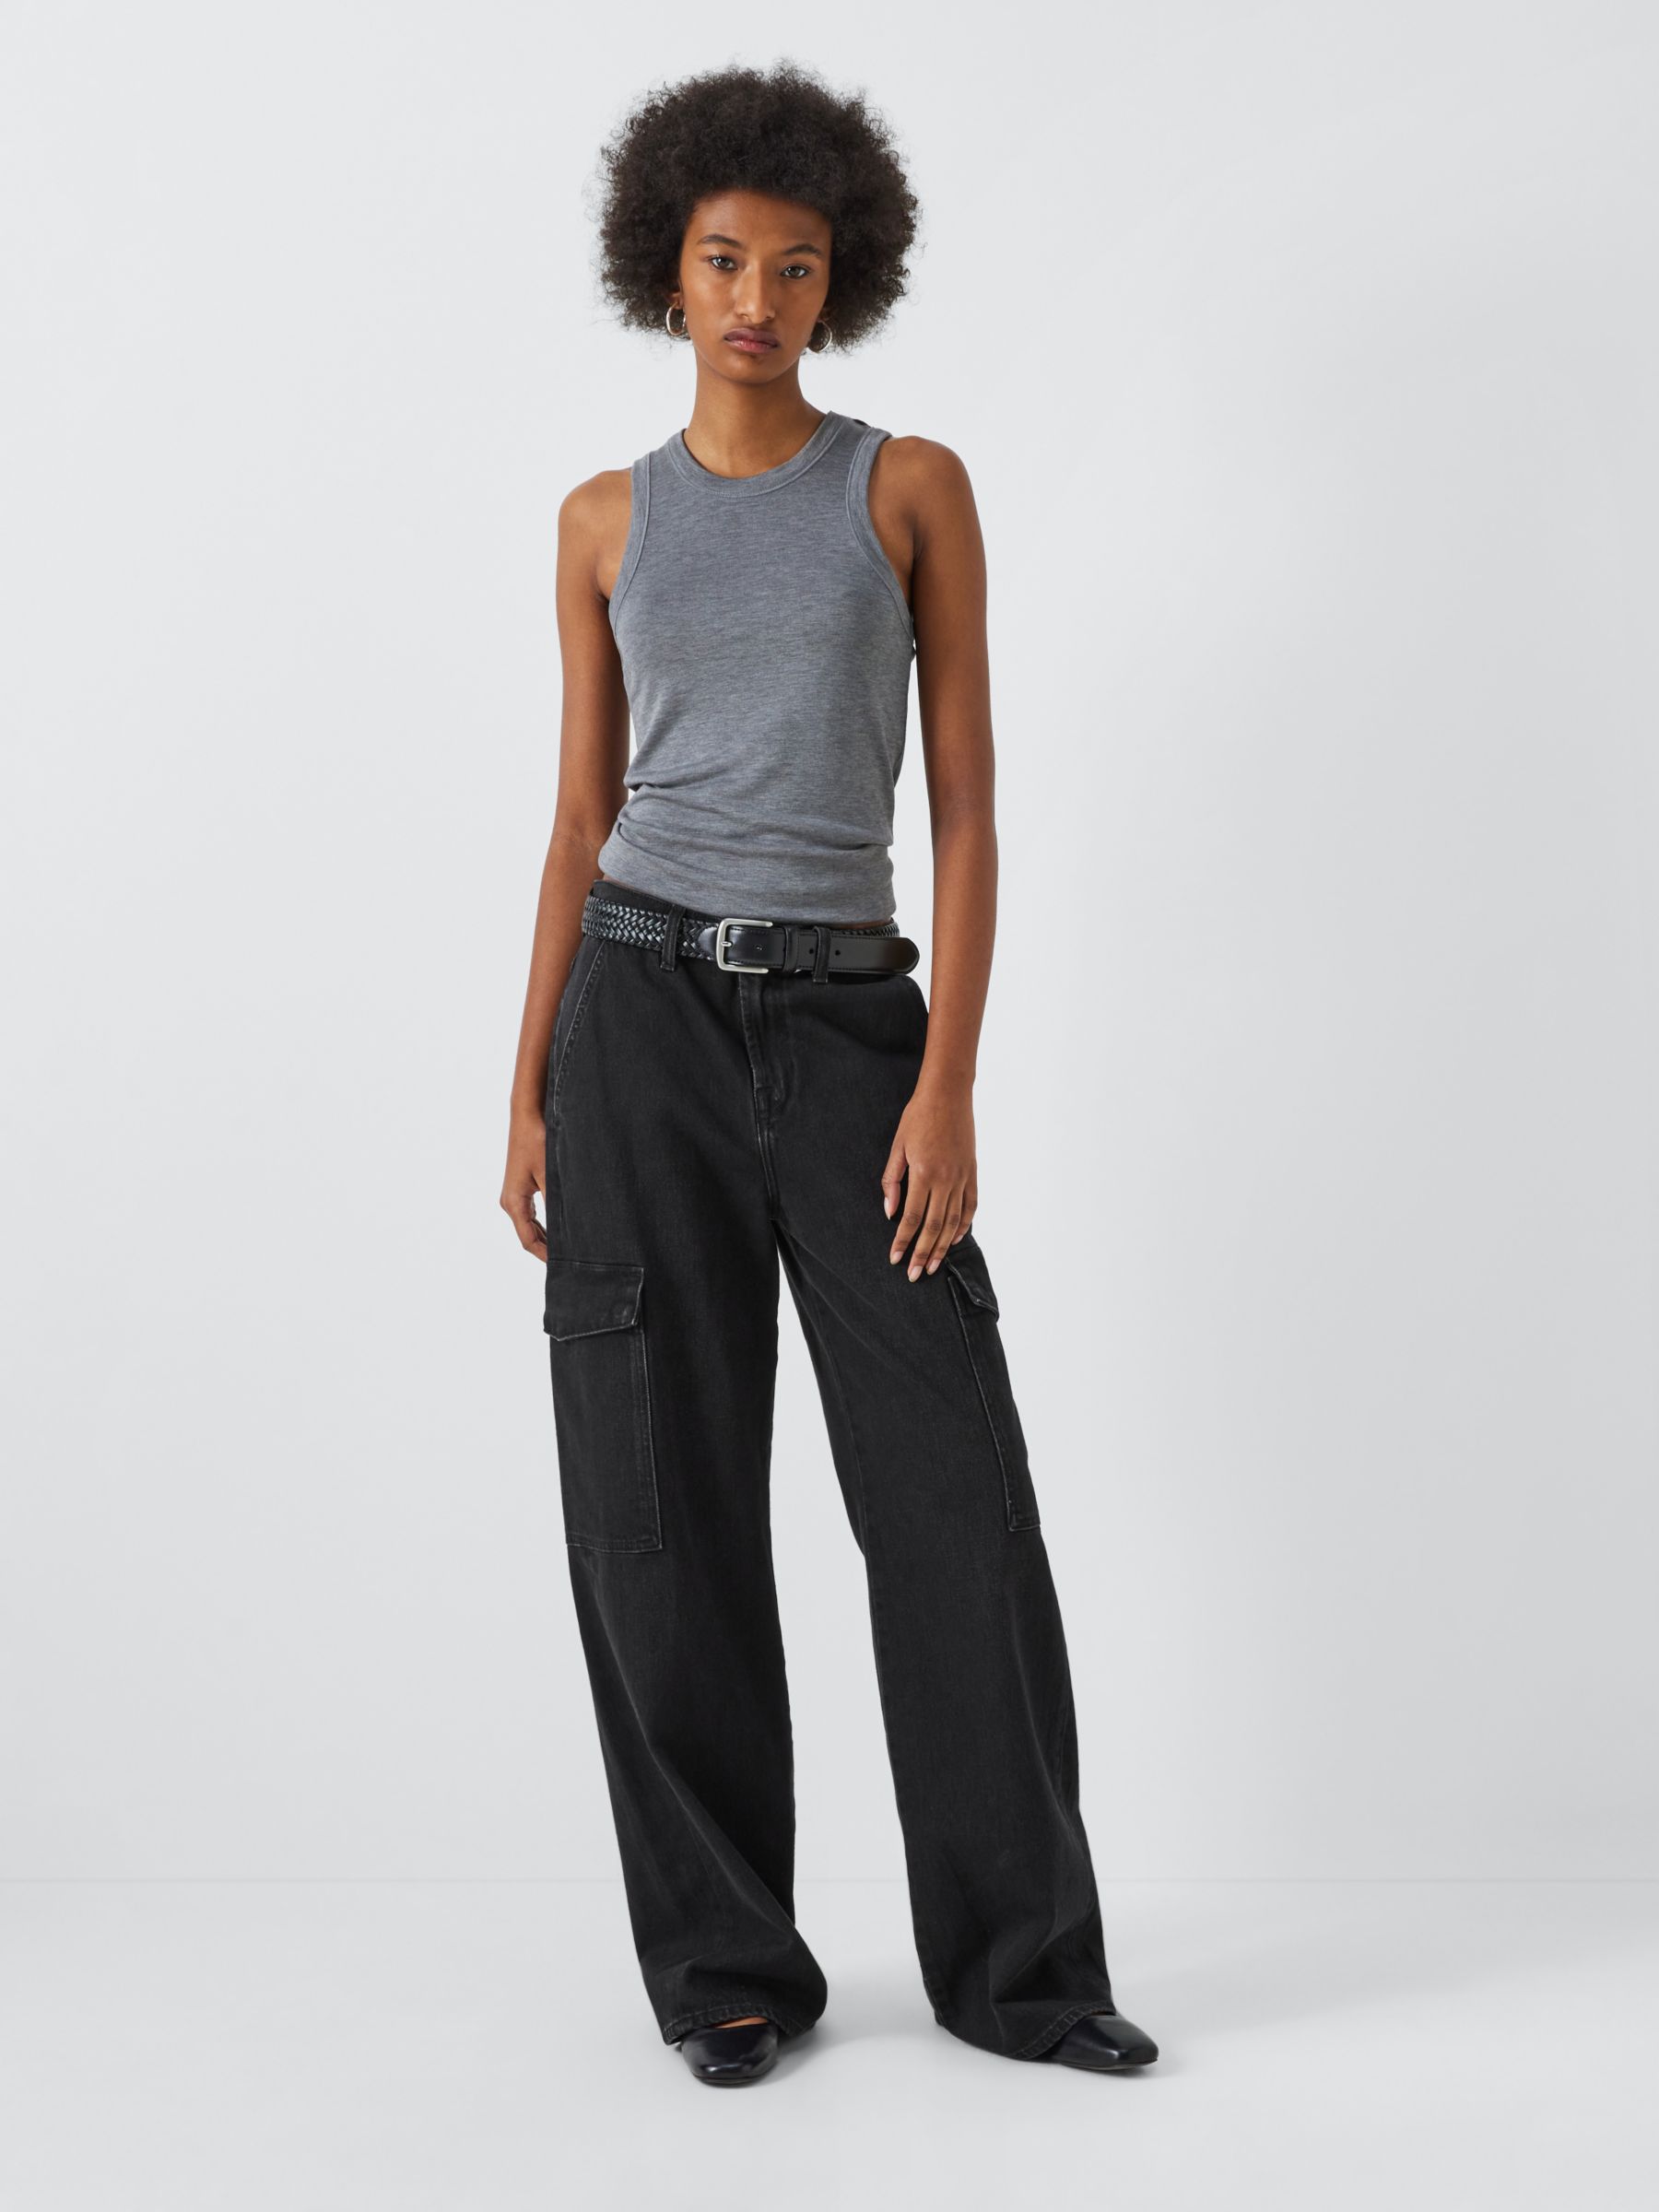 7 For All Mankind Cargo Scout Jeans, Global, 30